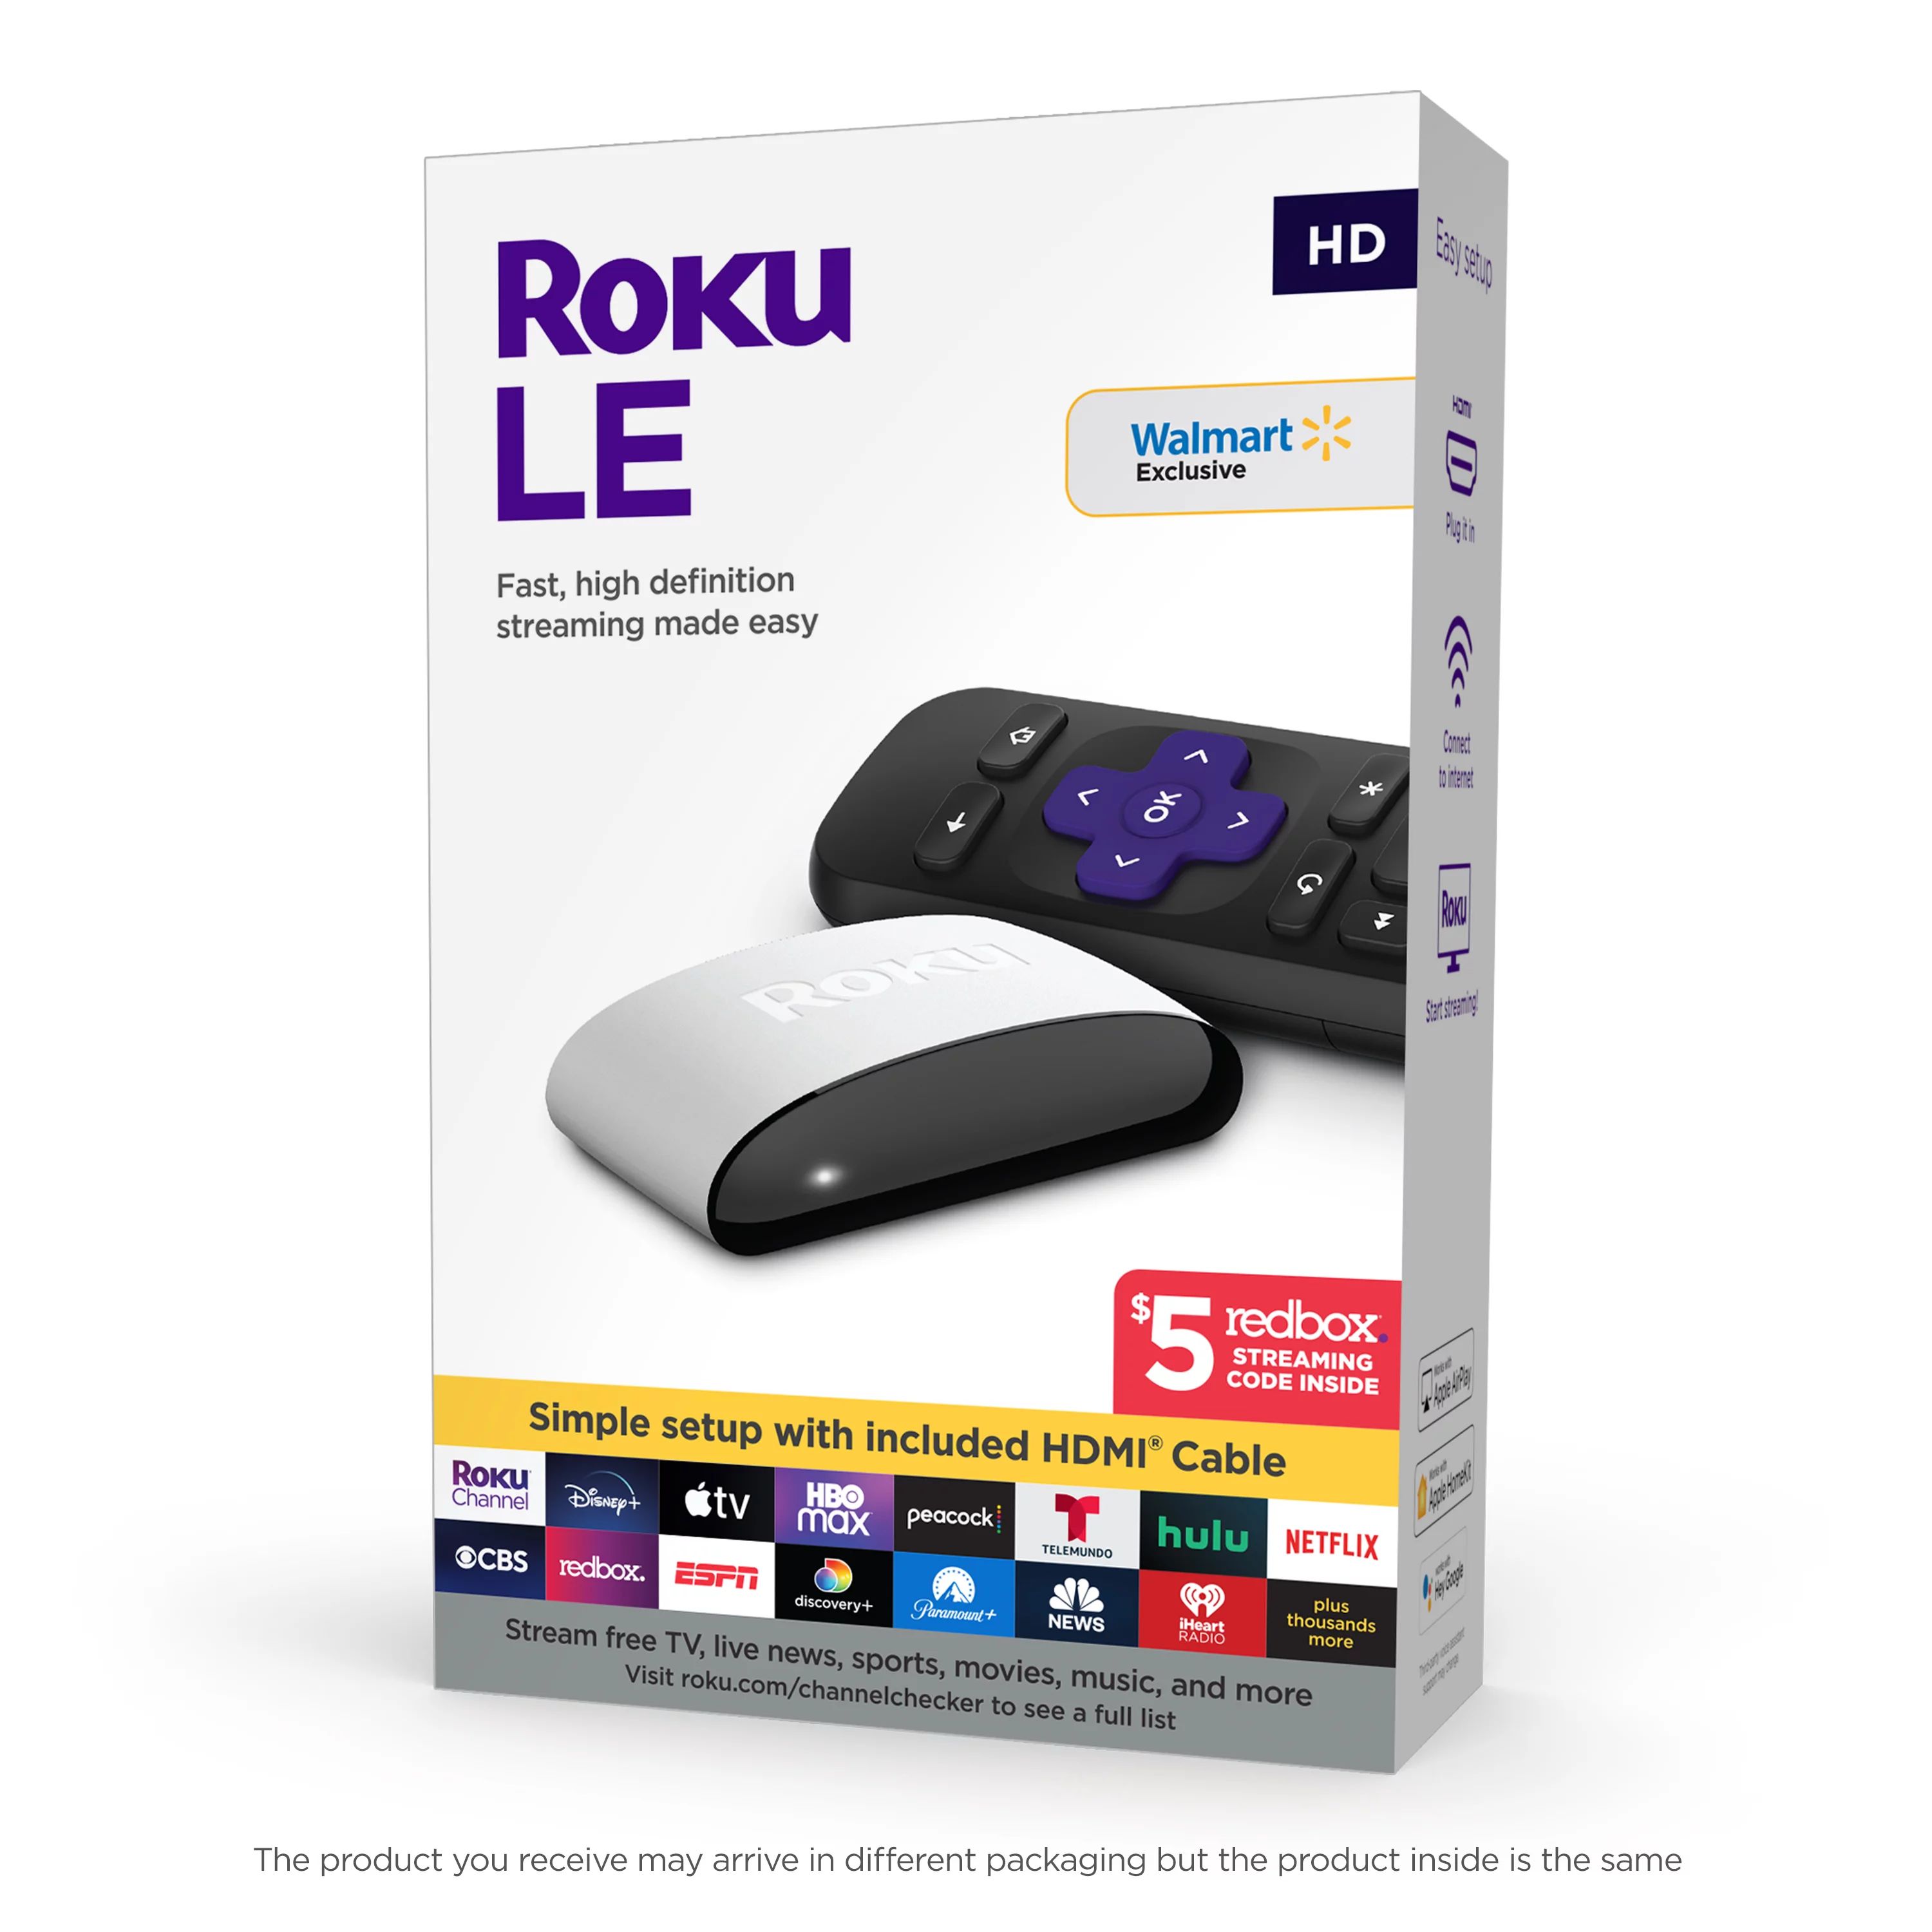 Roku LE HD Streaming Media Player with High Speed HDMI Cable and Simple Remote | Walmart (US)